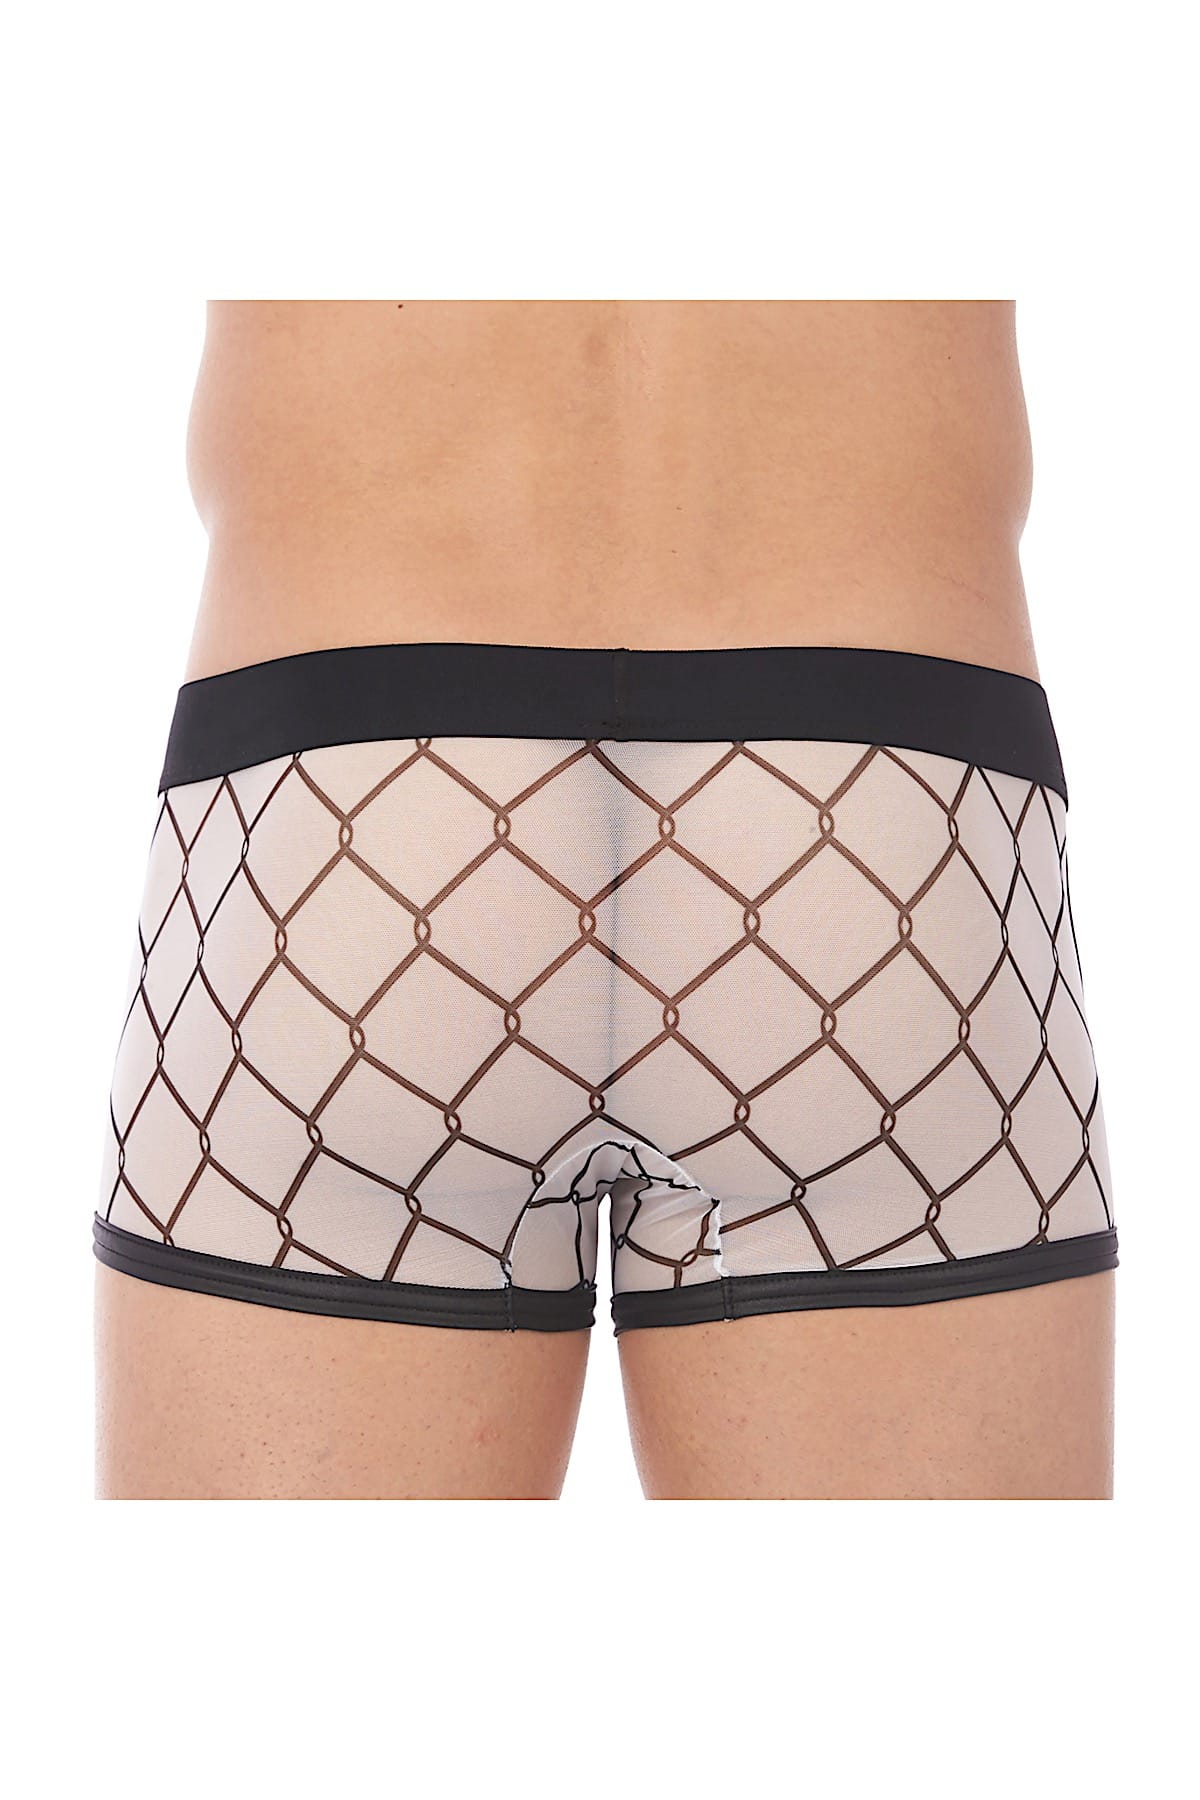 Gregg Homme White Wired Mesh C-Ring Boxer Brief